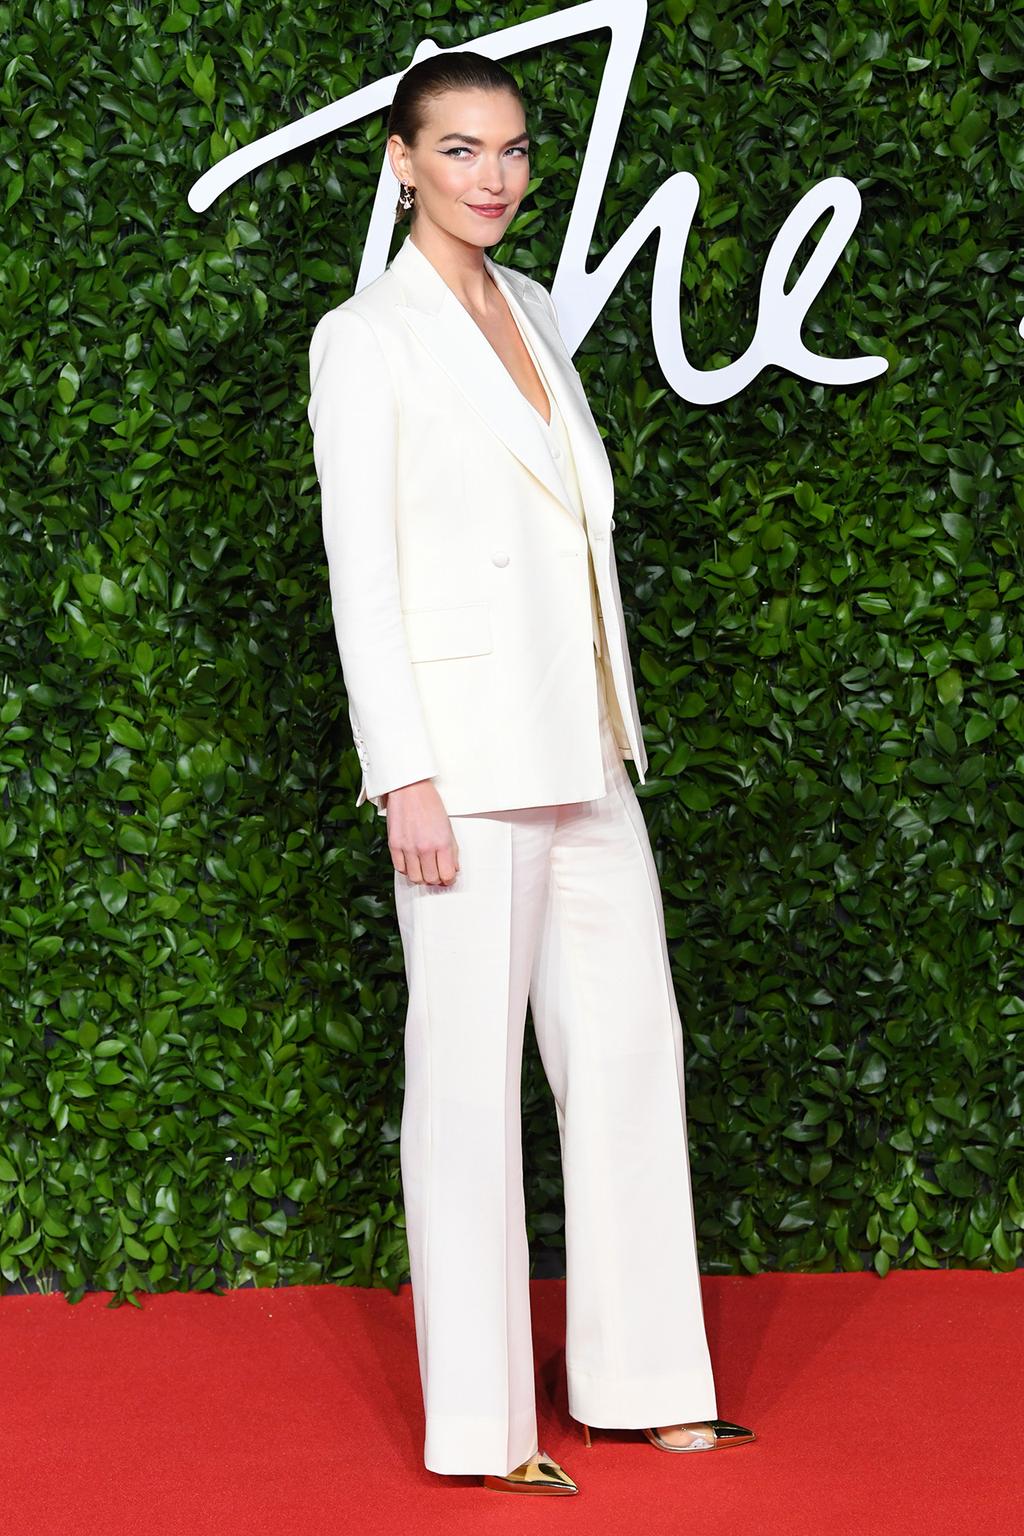 arizona-muse-in-the-deck-suit-2019-british-fashion-council-awards